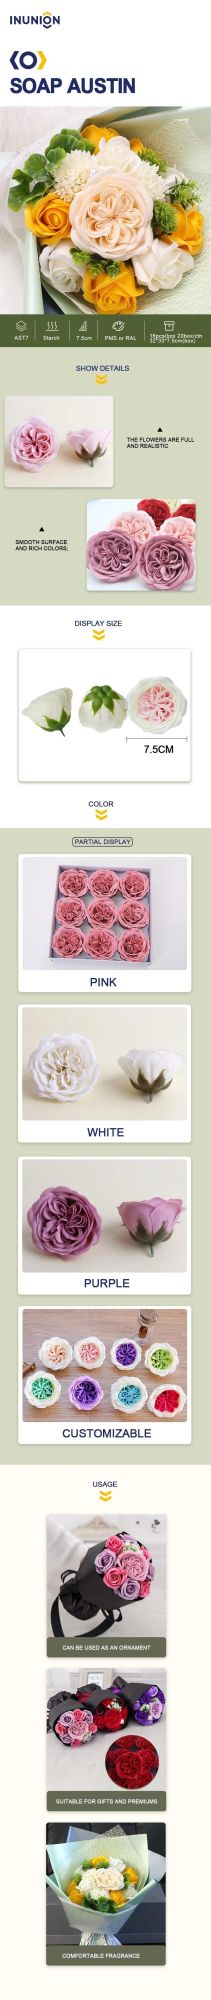 Soap Austin Flower Artificial Flowers Pink Austin Flower for Gift of Mother′ S Day, Valentine′ S Day and Other Holiday